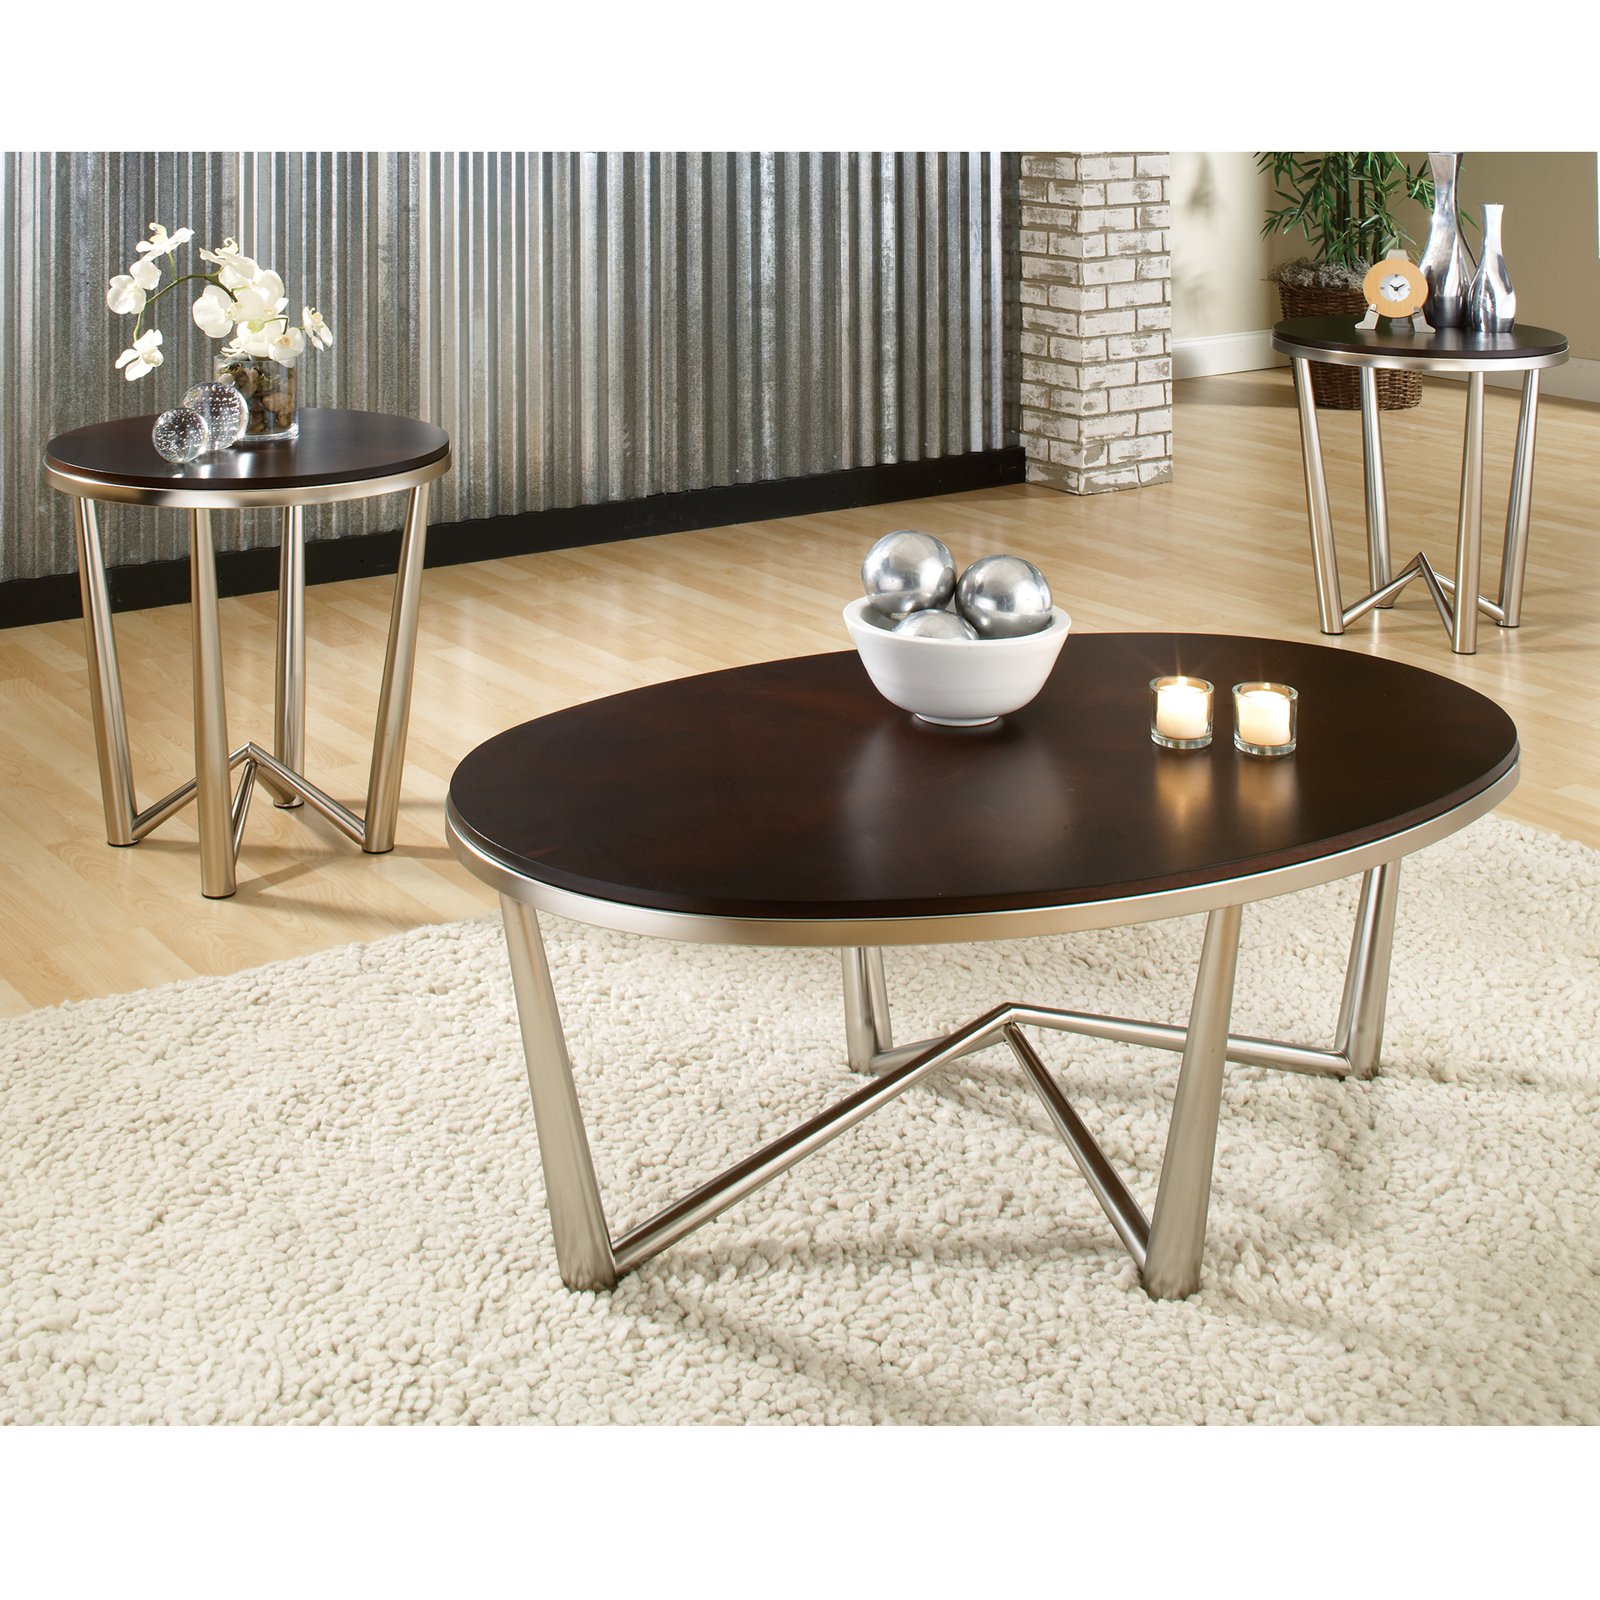 steve silver cosmo oval cherry wood piece coffee table set accent nate berkus side living room sofa tables oak wine rack homesense lamps small fold metal and glass wall mounted